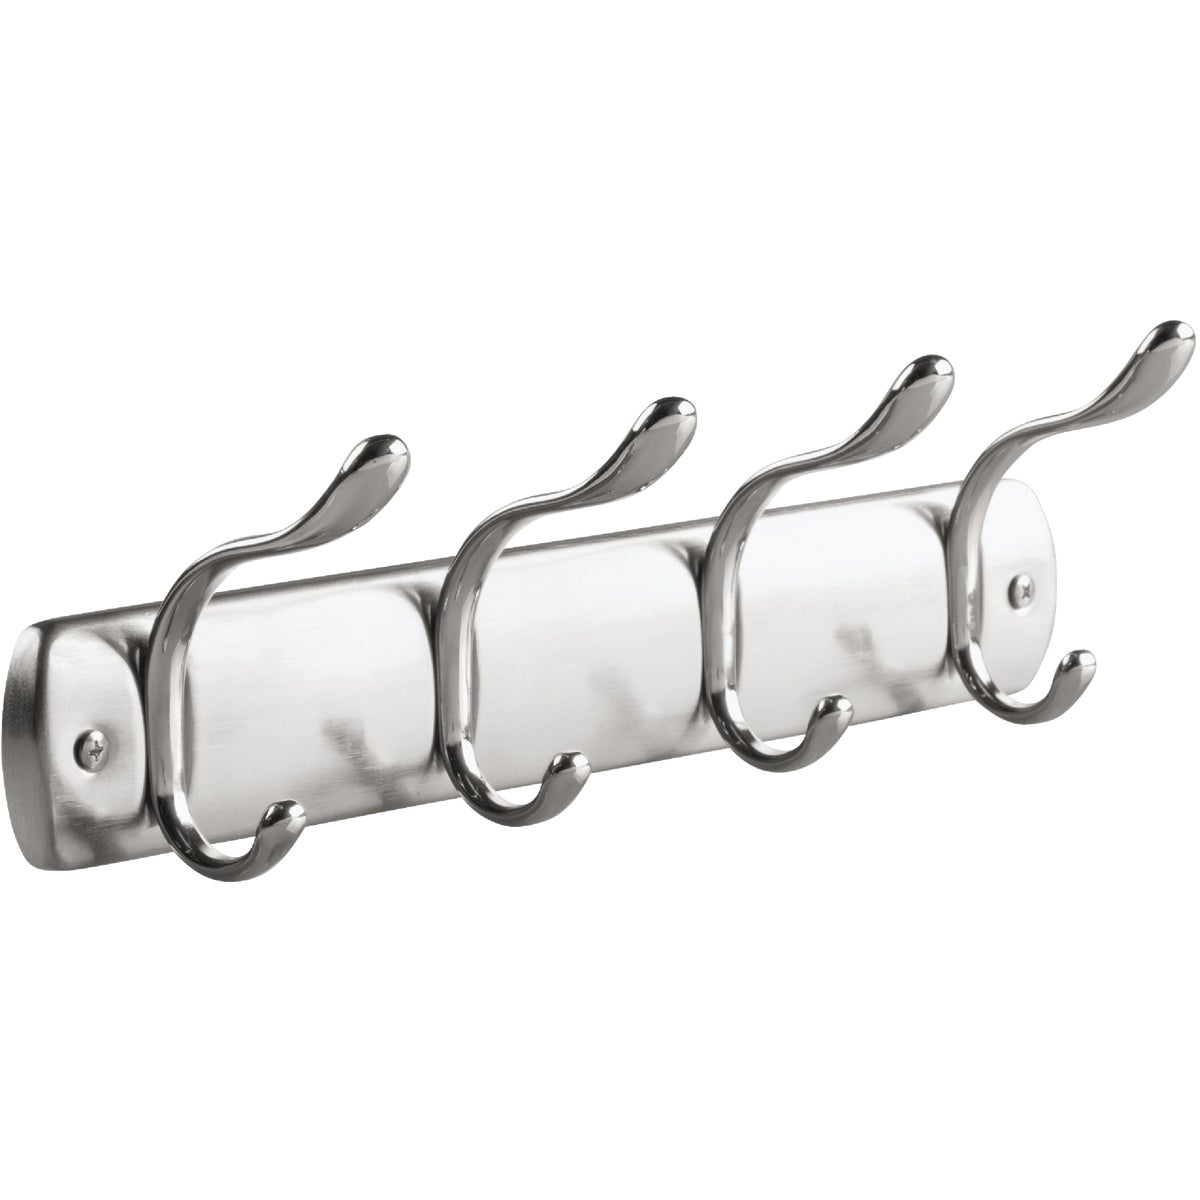 Item 644532, iDesign's Bruschia Wall Mount Rack is great for hall entries, bathrooms, 